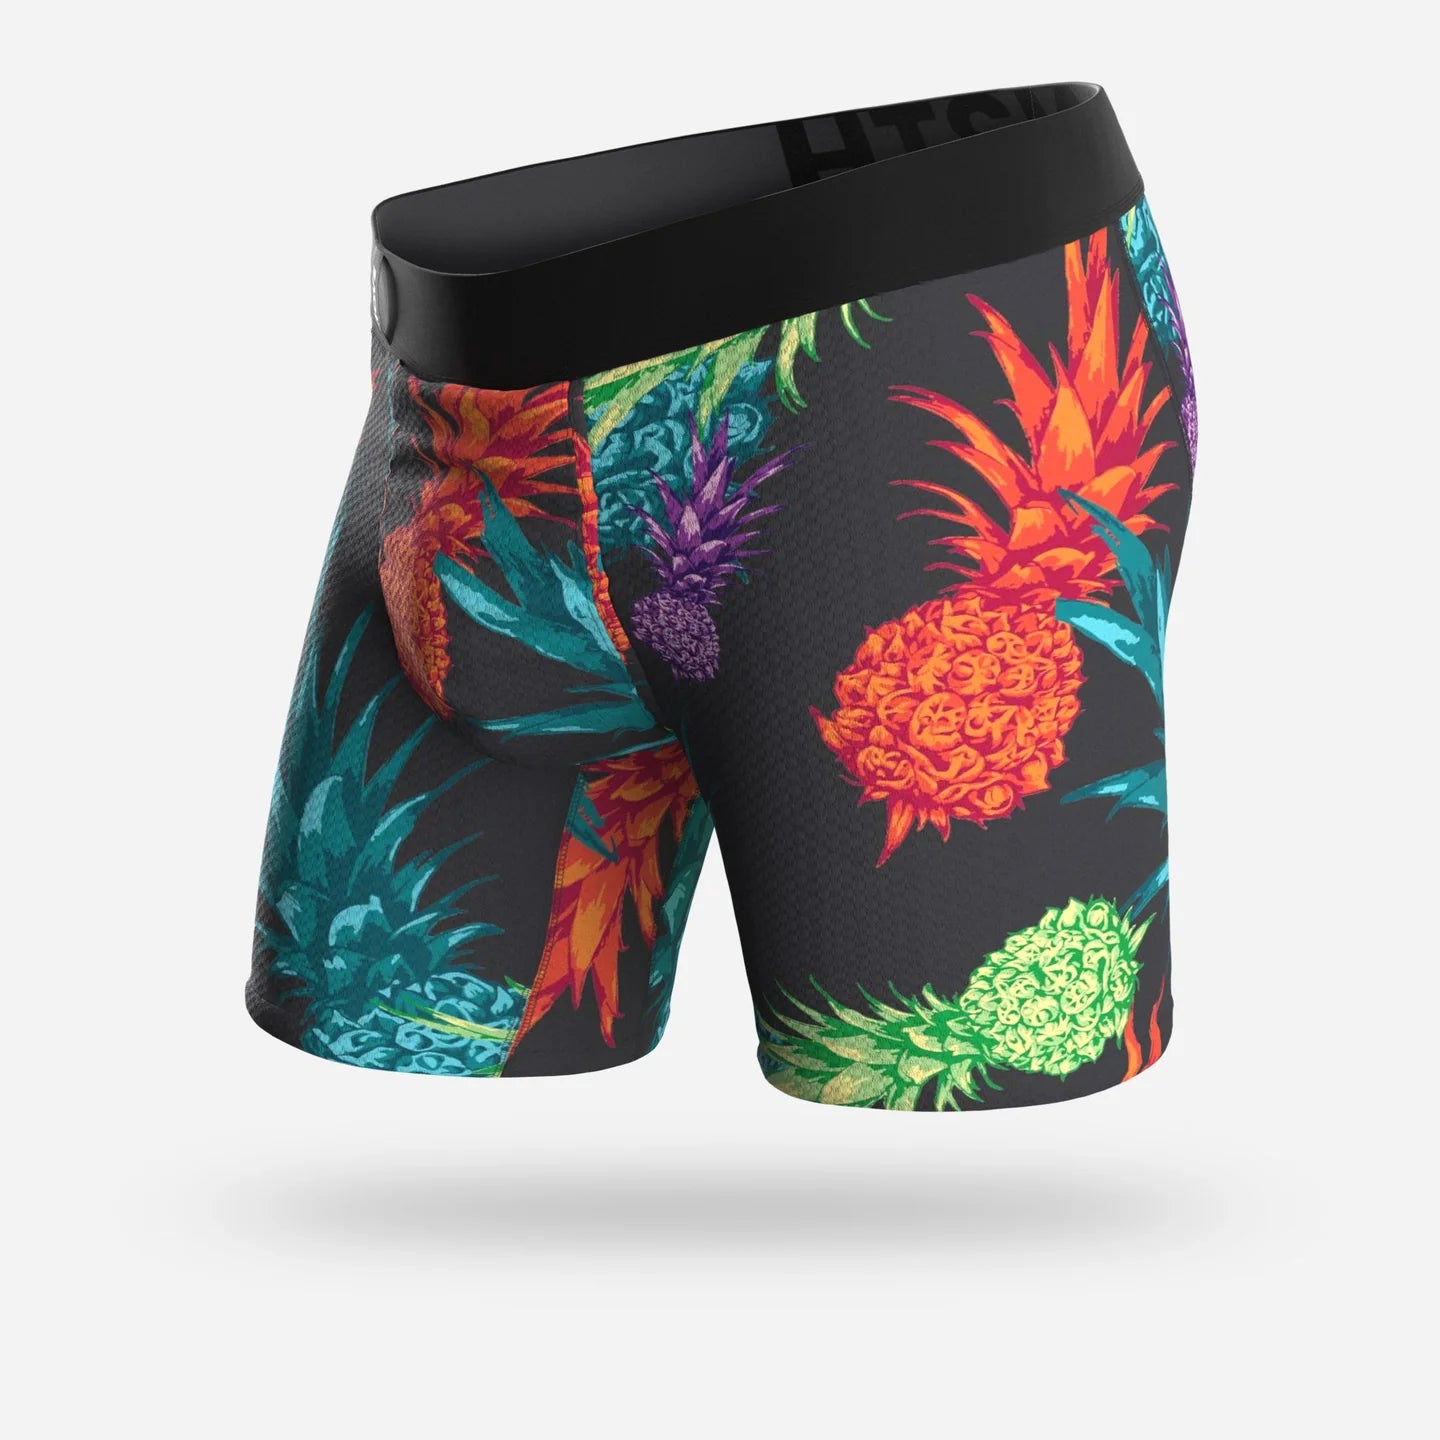 These active Boxer Briefs are made from 100% post-consumer recycled plastic bottles and come in a range of limited edition collaborative prints. 